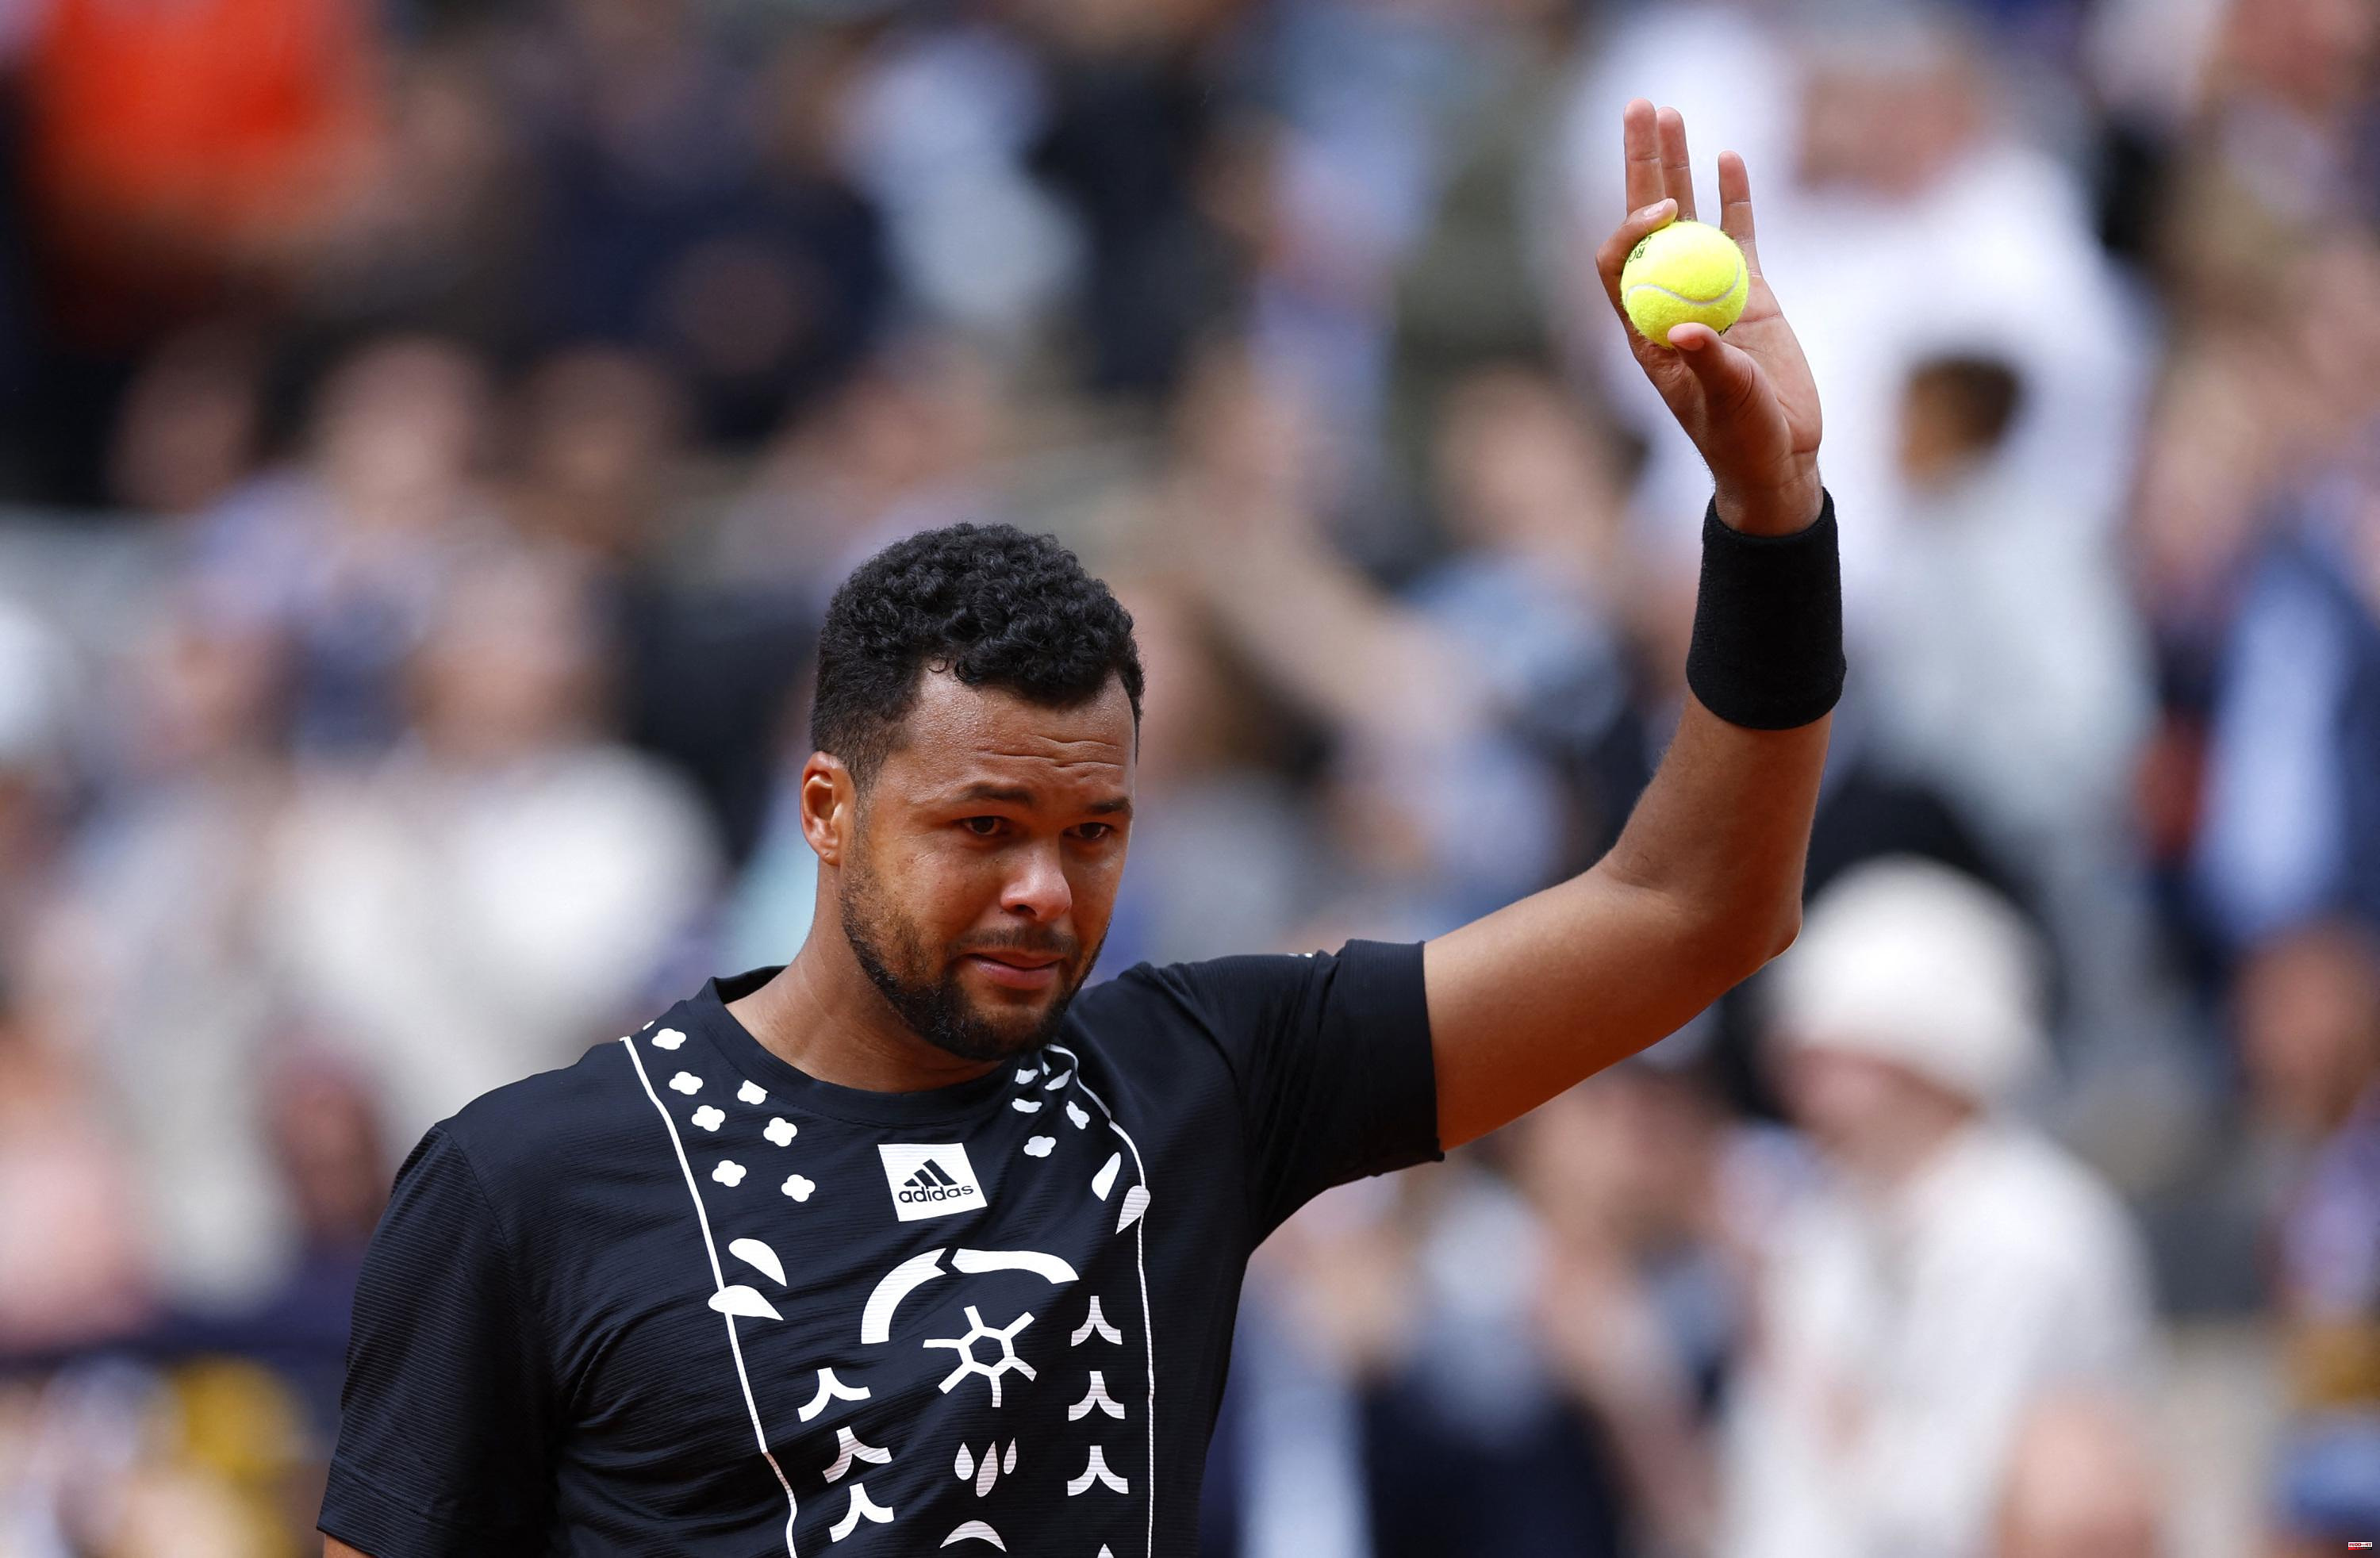 Roland-Garros: Tsonga loses to Ruud for his last match